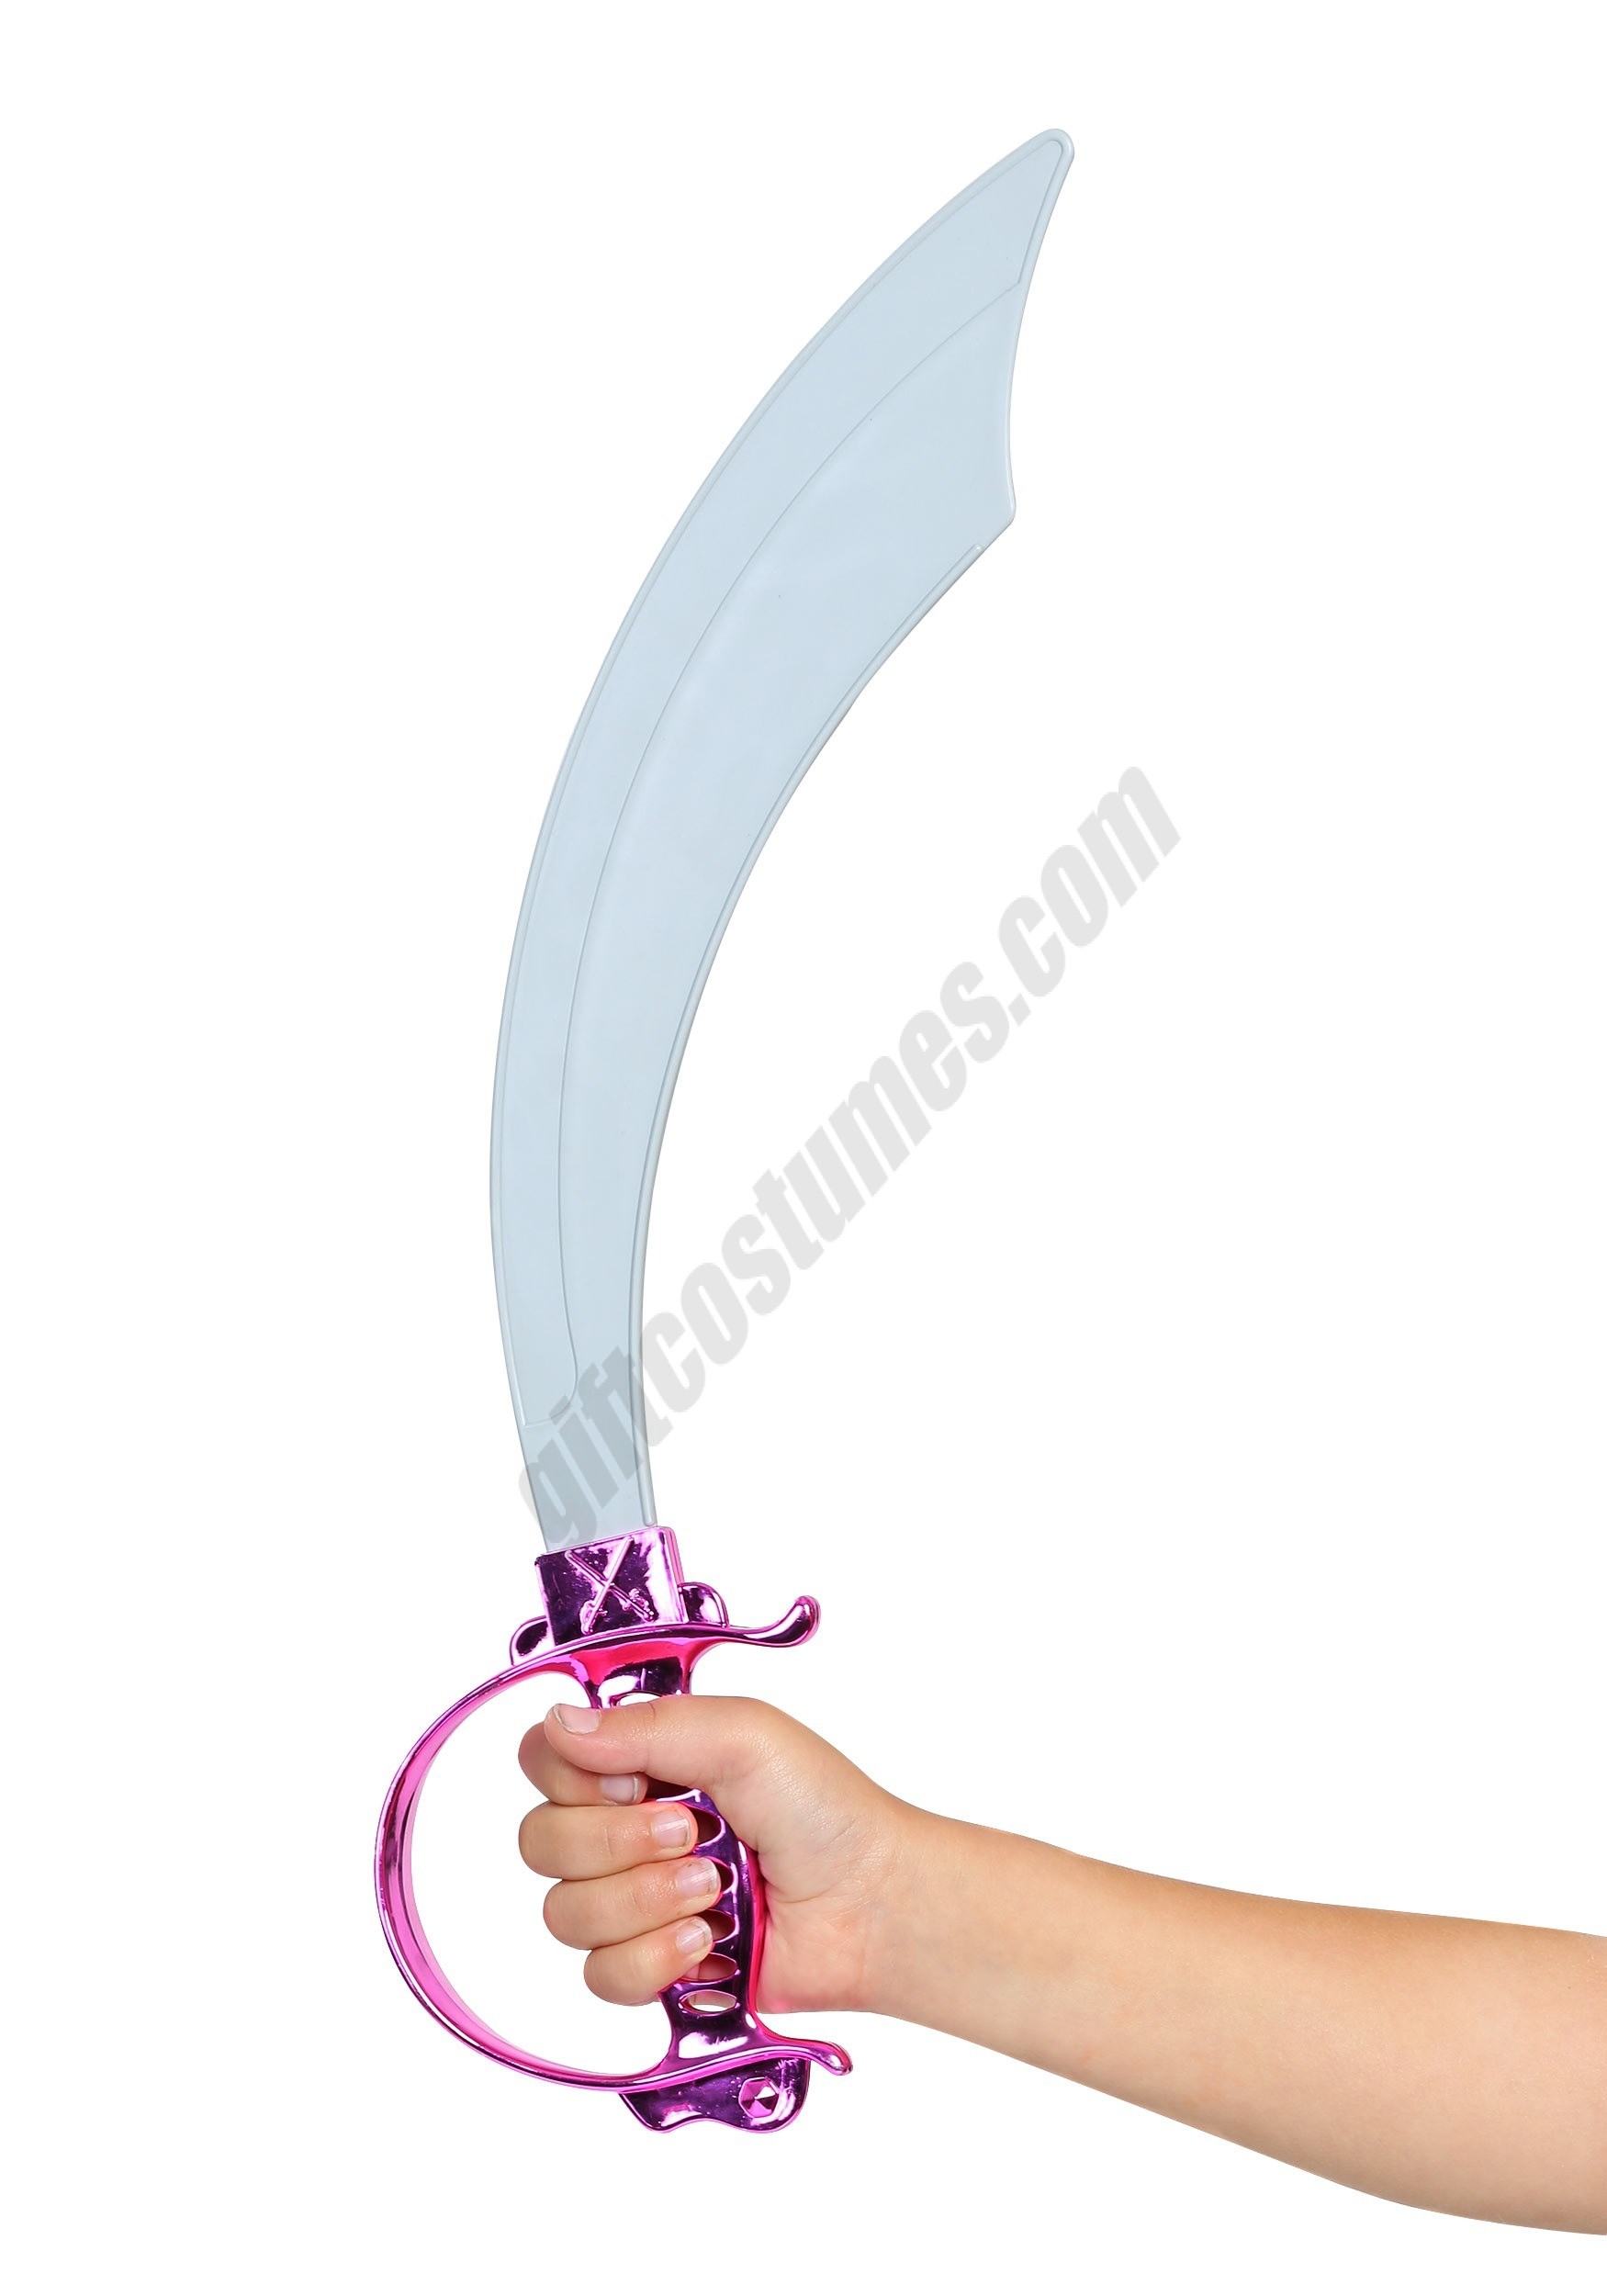 Girl's Pink Pirate Sword Promotions - Girl's Pink Pirate Sword Promotions